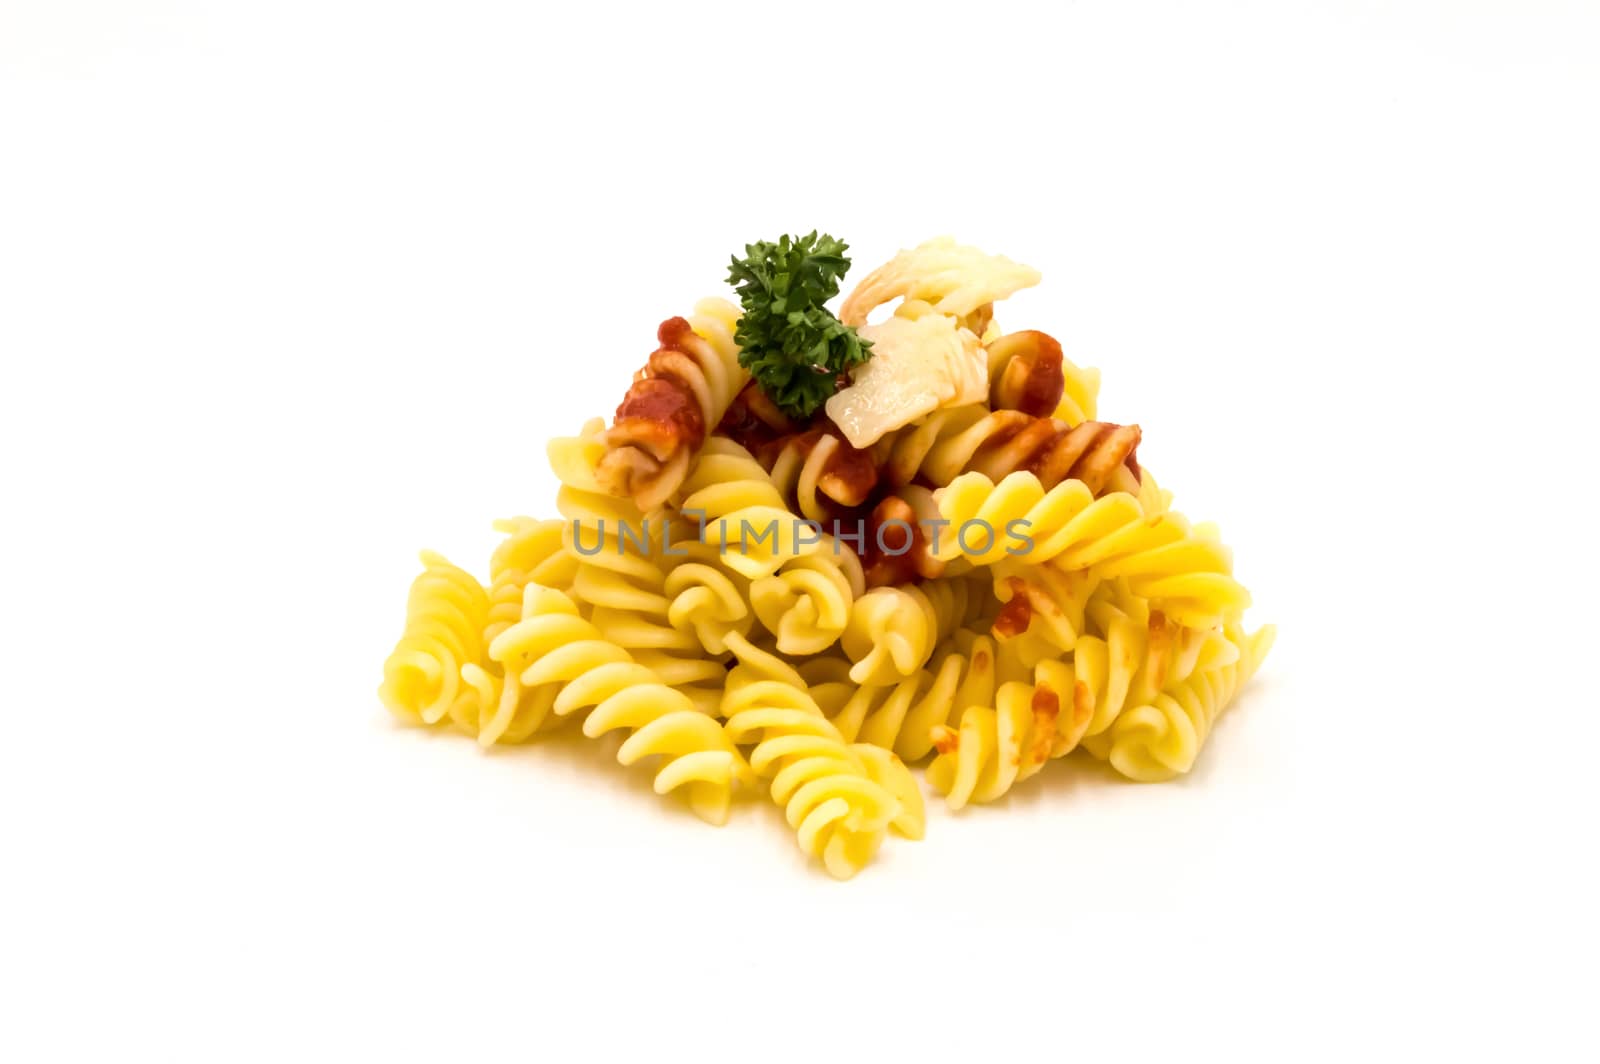 Twisted pasta with a tomato coulis and gruyere cheese on a white background